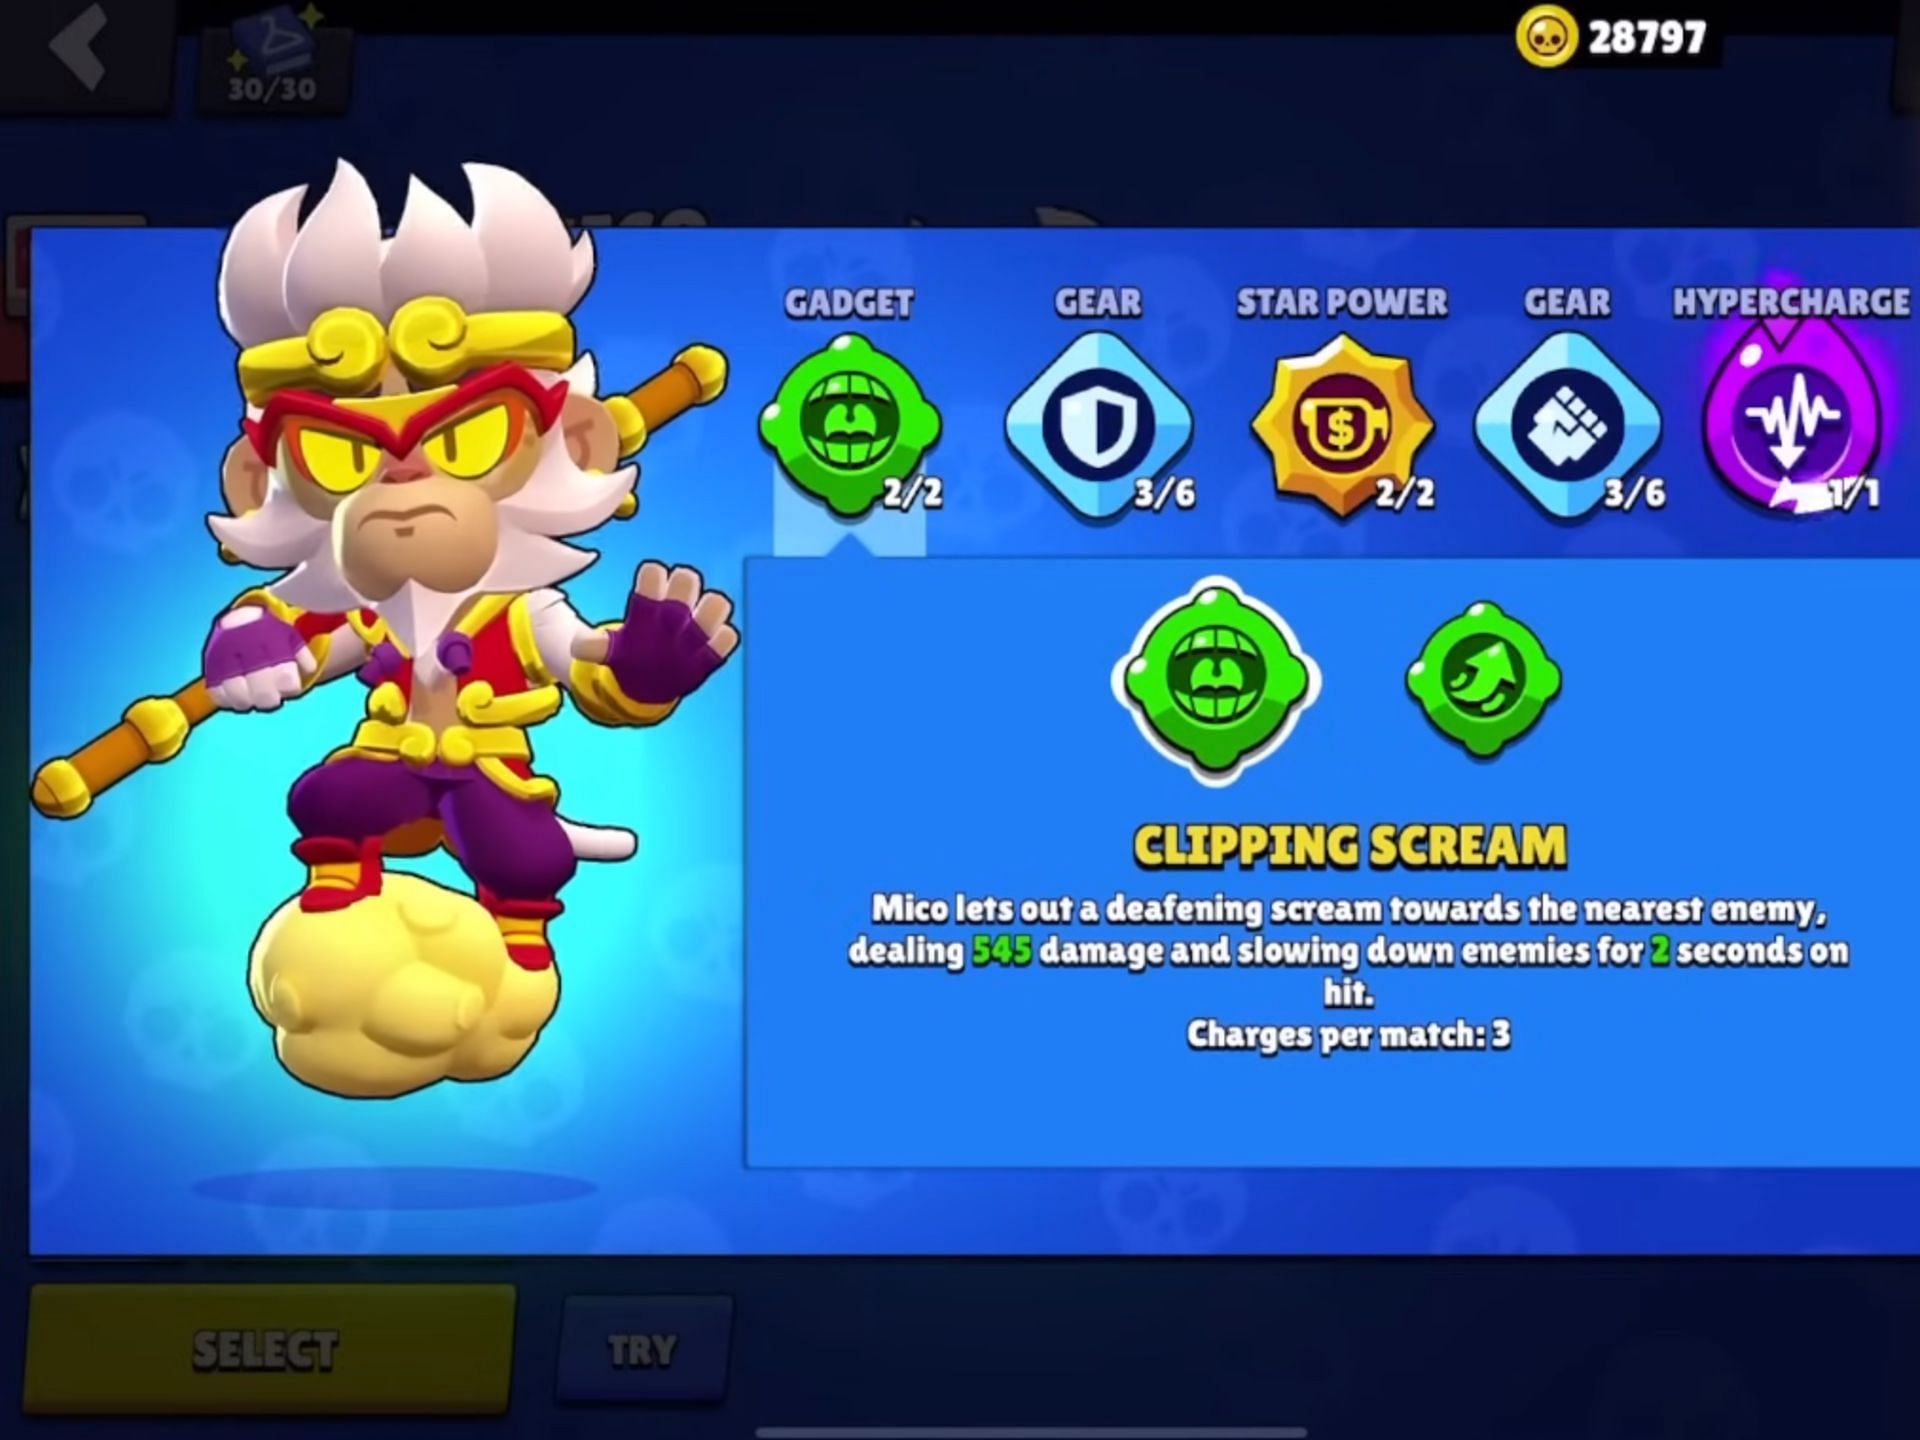 Clipping Scream Gadget (Image via Supercell)